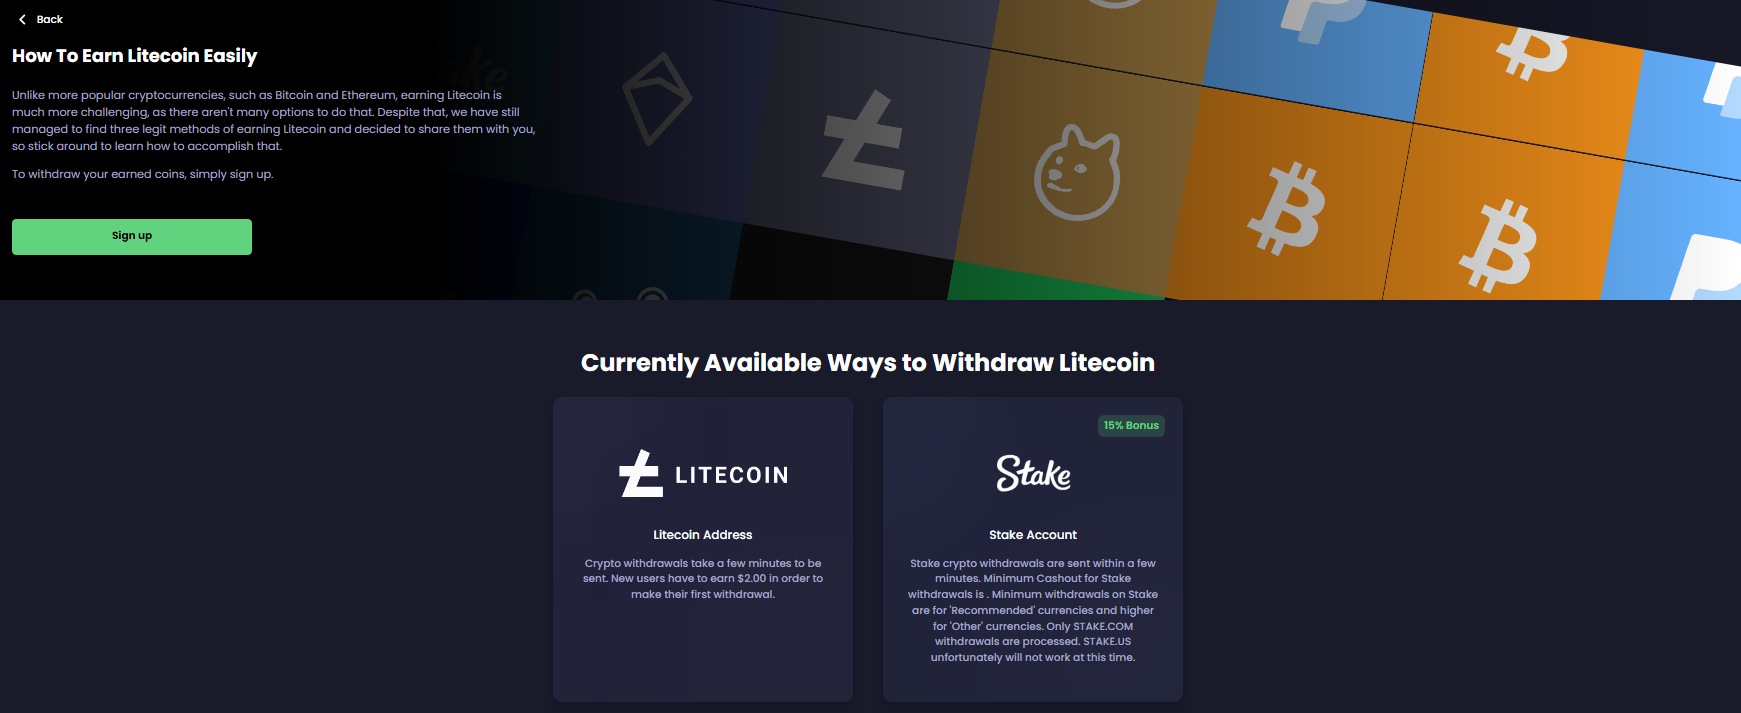 Litecoin is offered on Freecash